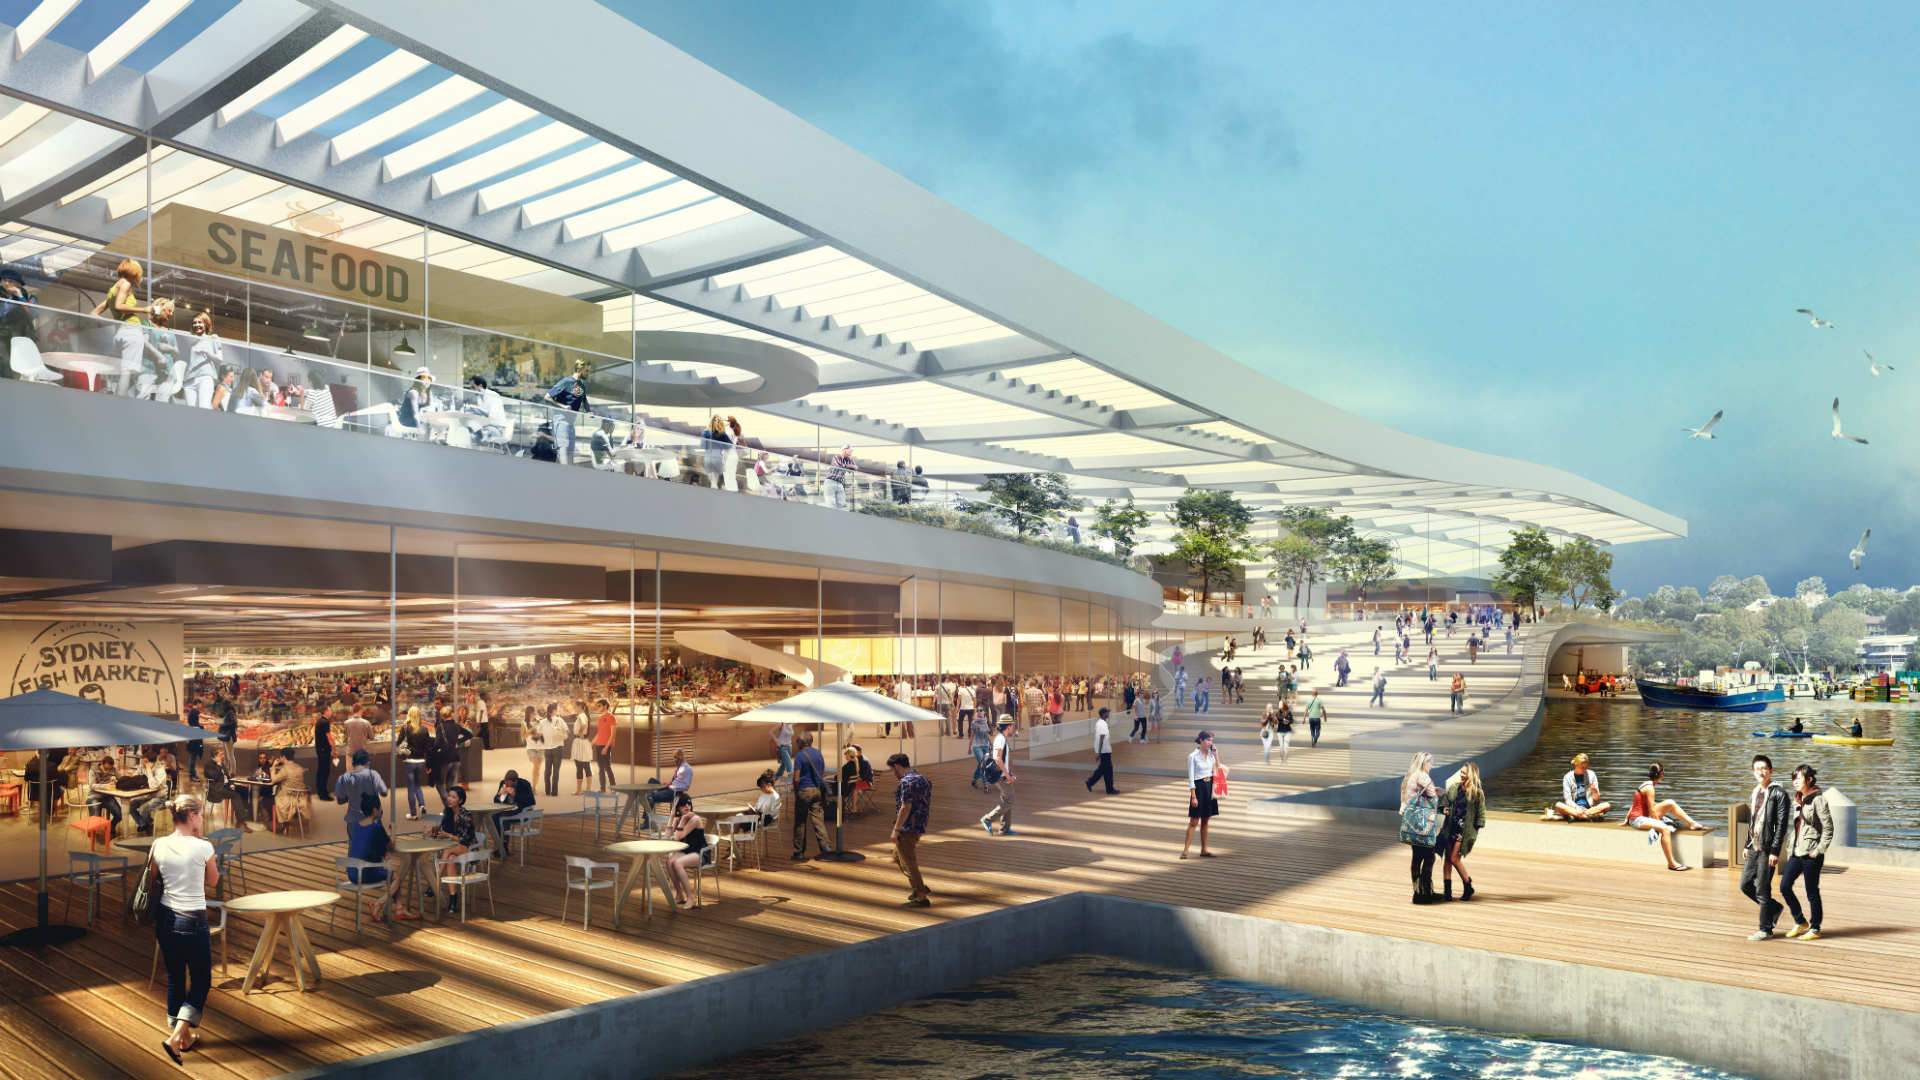 Sydney Fish Market Is Undergoing a Colossal $250 Million Redesign